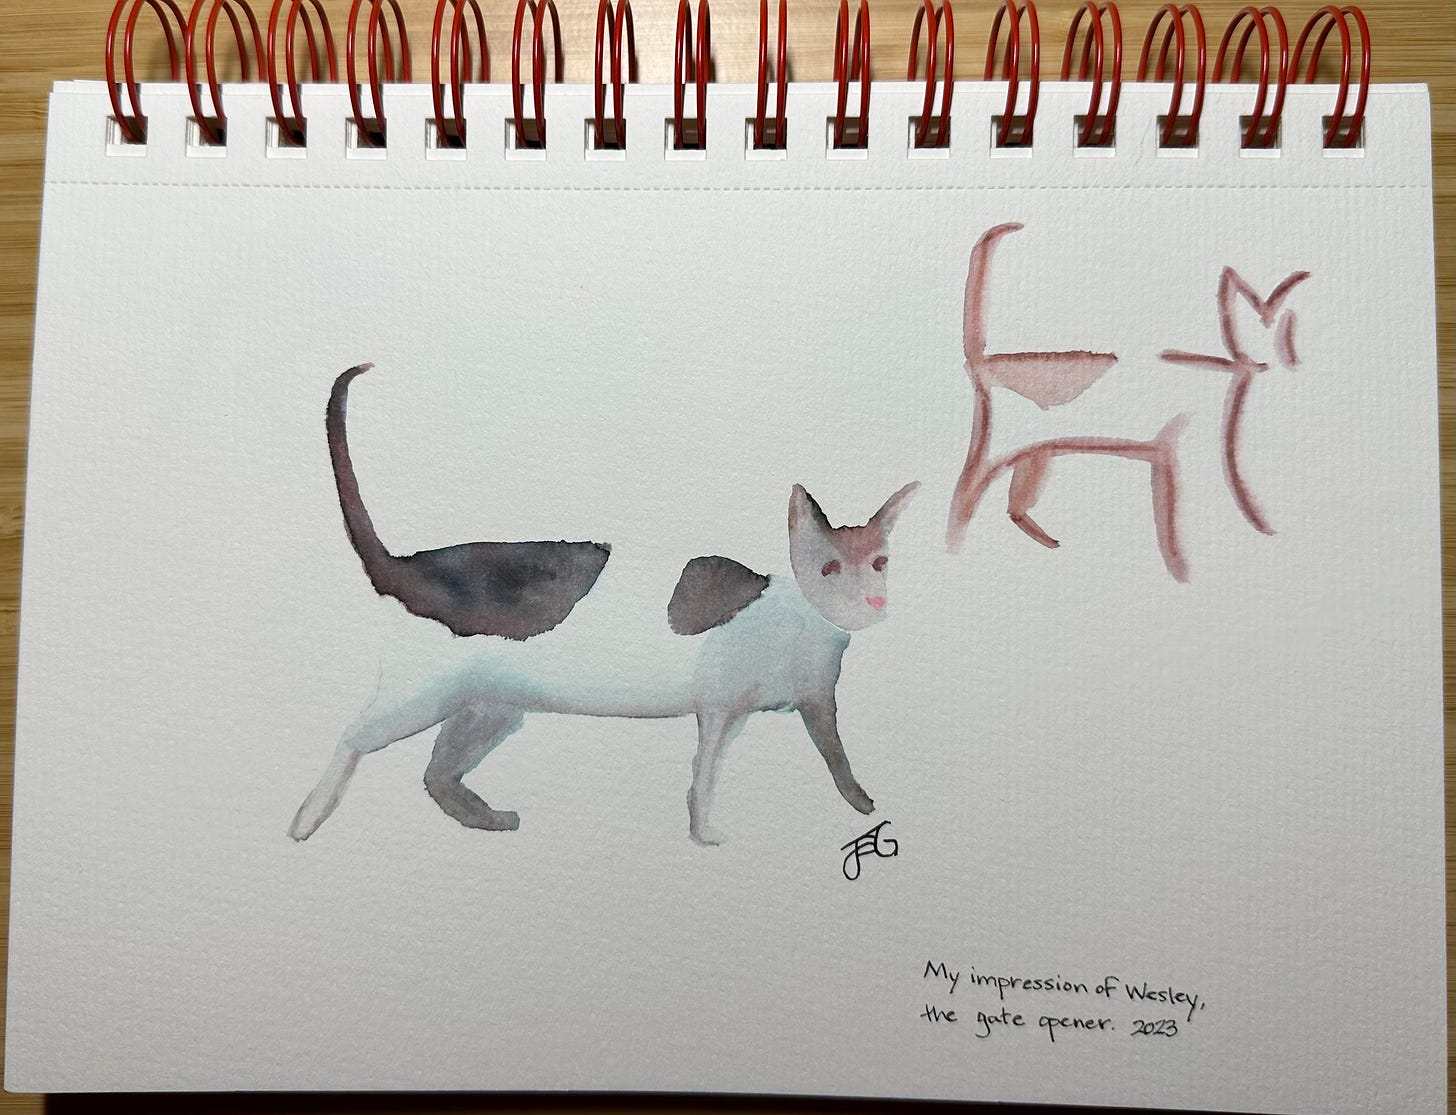 Two watercolor sketches of a cat, one is more like a stick figure, the other has more body to it.